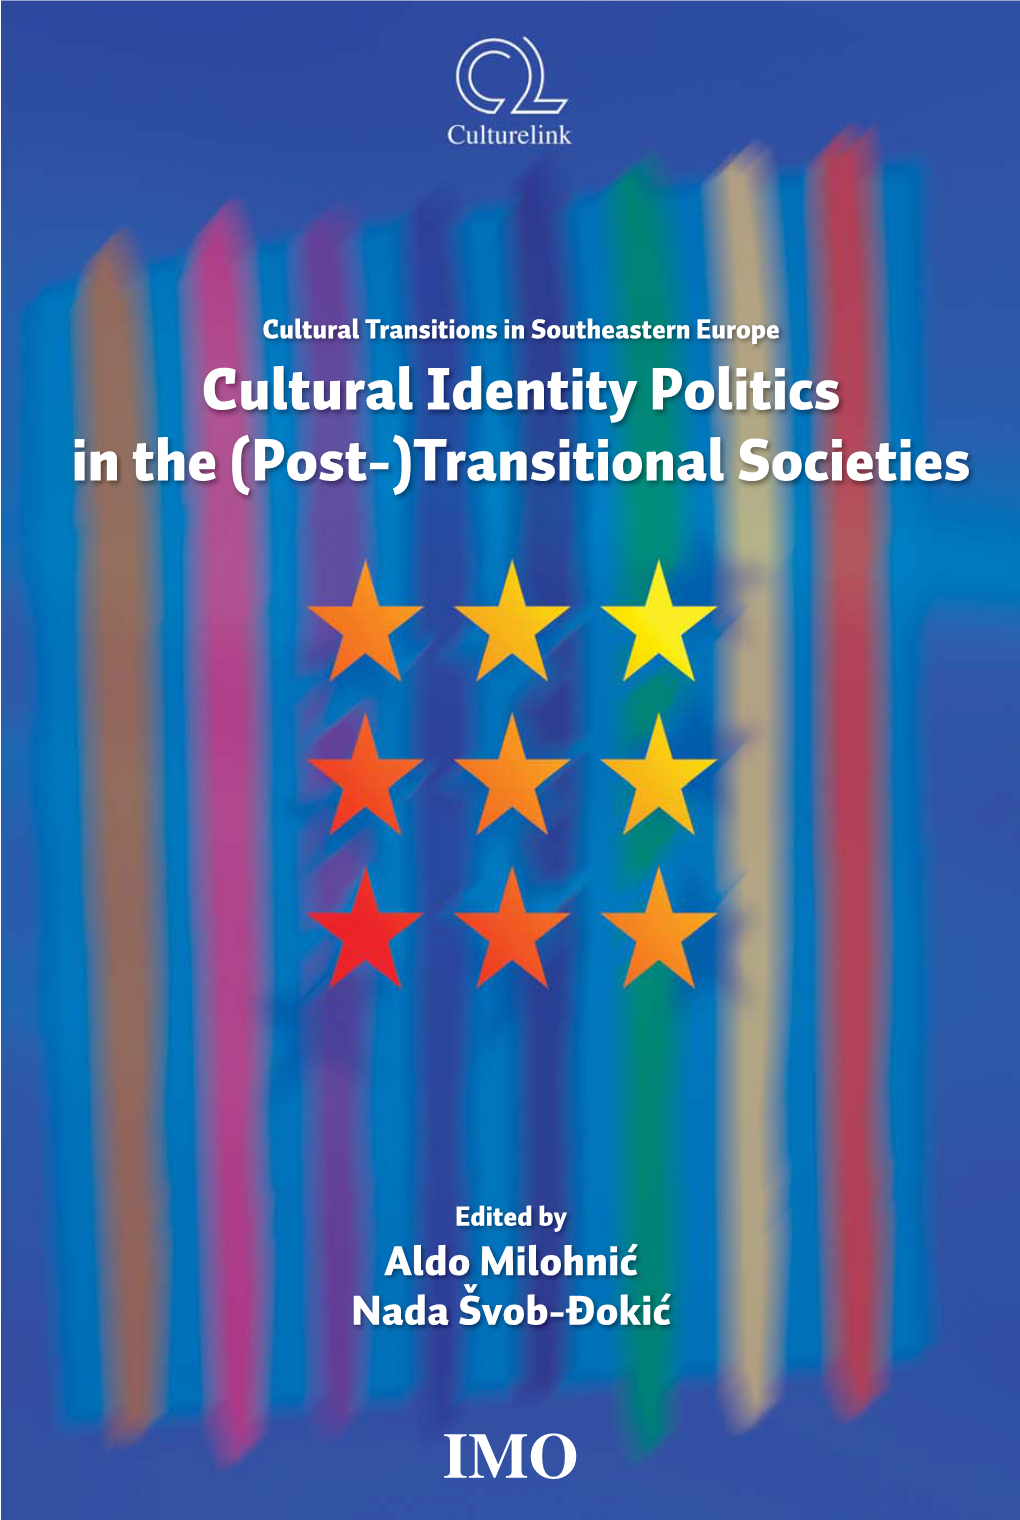 Cultural Identity Politics in the (Post-)Transitional Societies